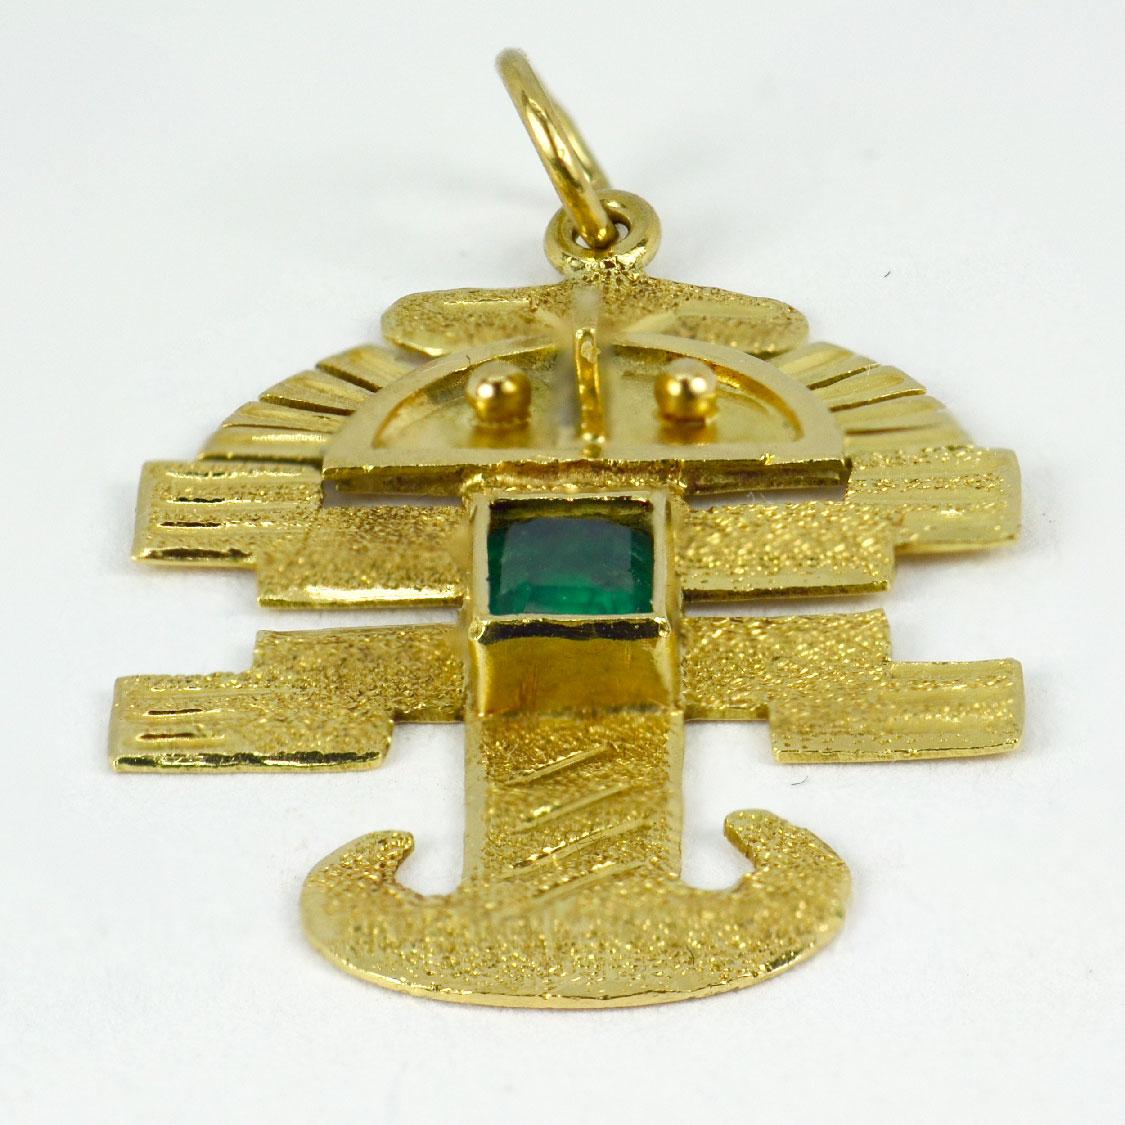 An 18 karat (18K) yellow gold charm pendant designed as an Inca god or icon set with an emerald cut emerald with an estimated weight of 0.27 carats. Unmarked but tested for 18 karat gold.

Dimensions: 3.1 x 1.9 x 0.25 cm (not including jump